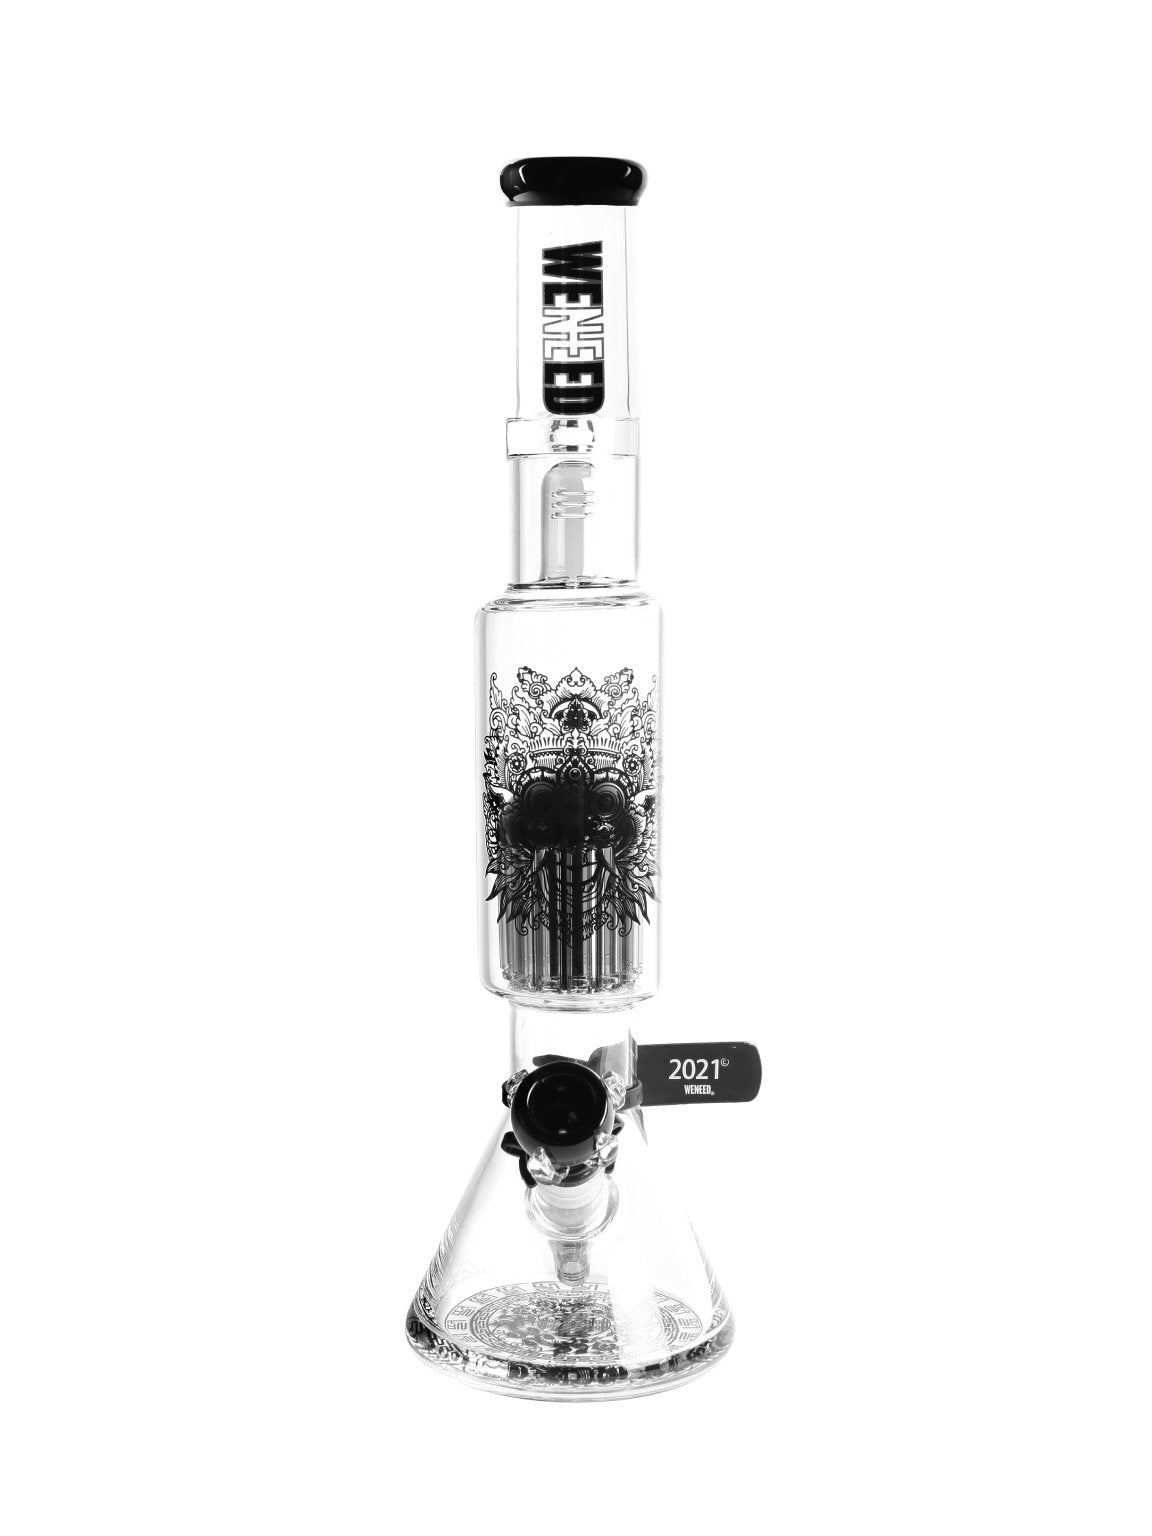 18” WENEED Glass Bong + Perculator + Downstem Lock - “Beasts of the East” Collection